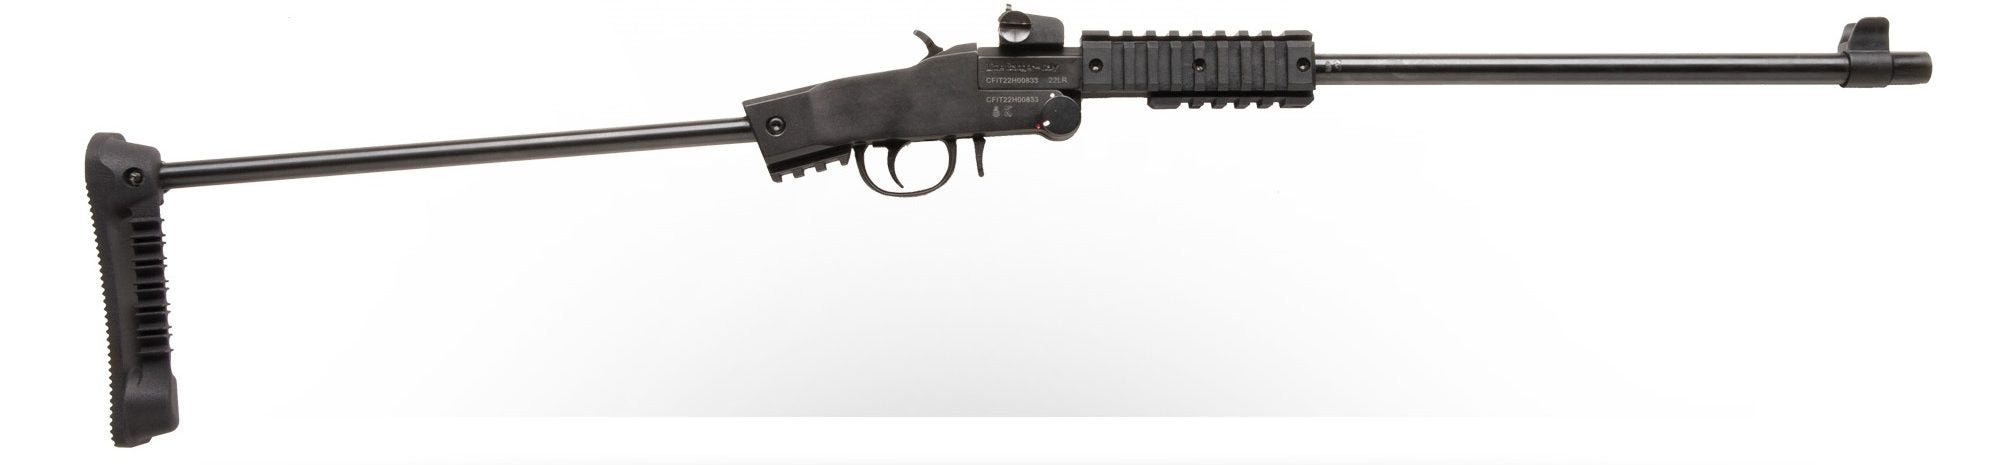 Chiappa's NEW Little Badger Take Down Xtreme Rifle